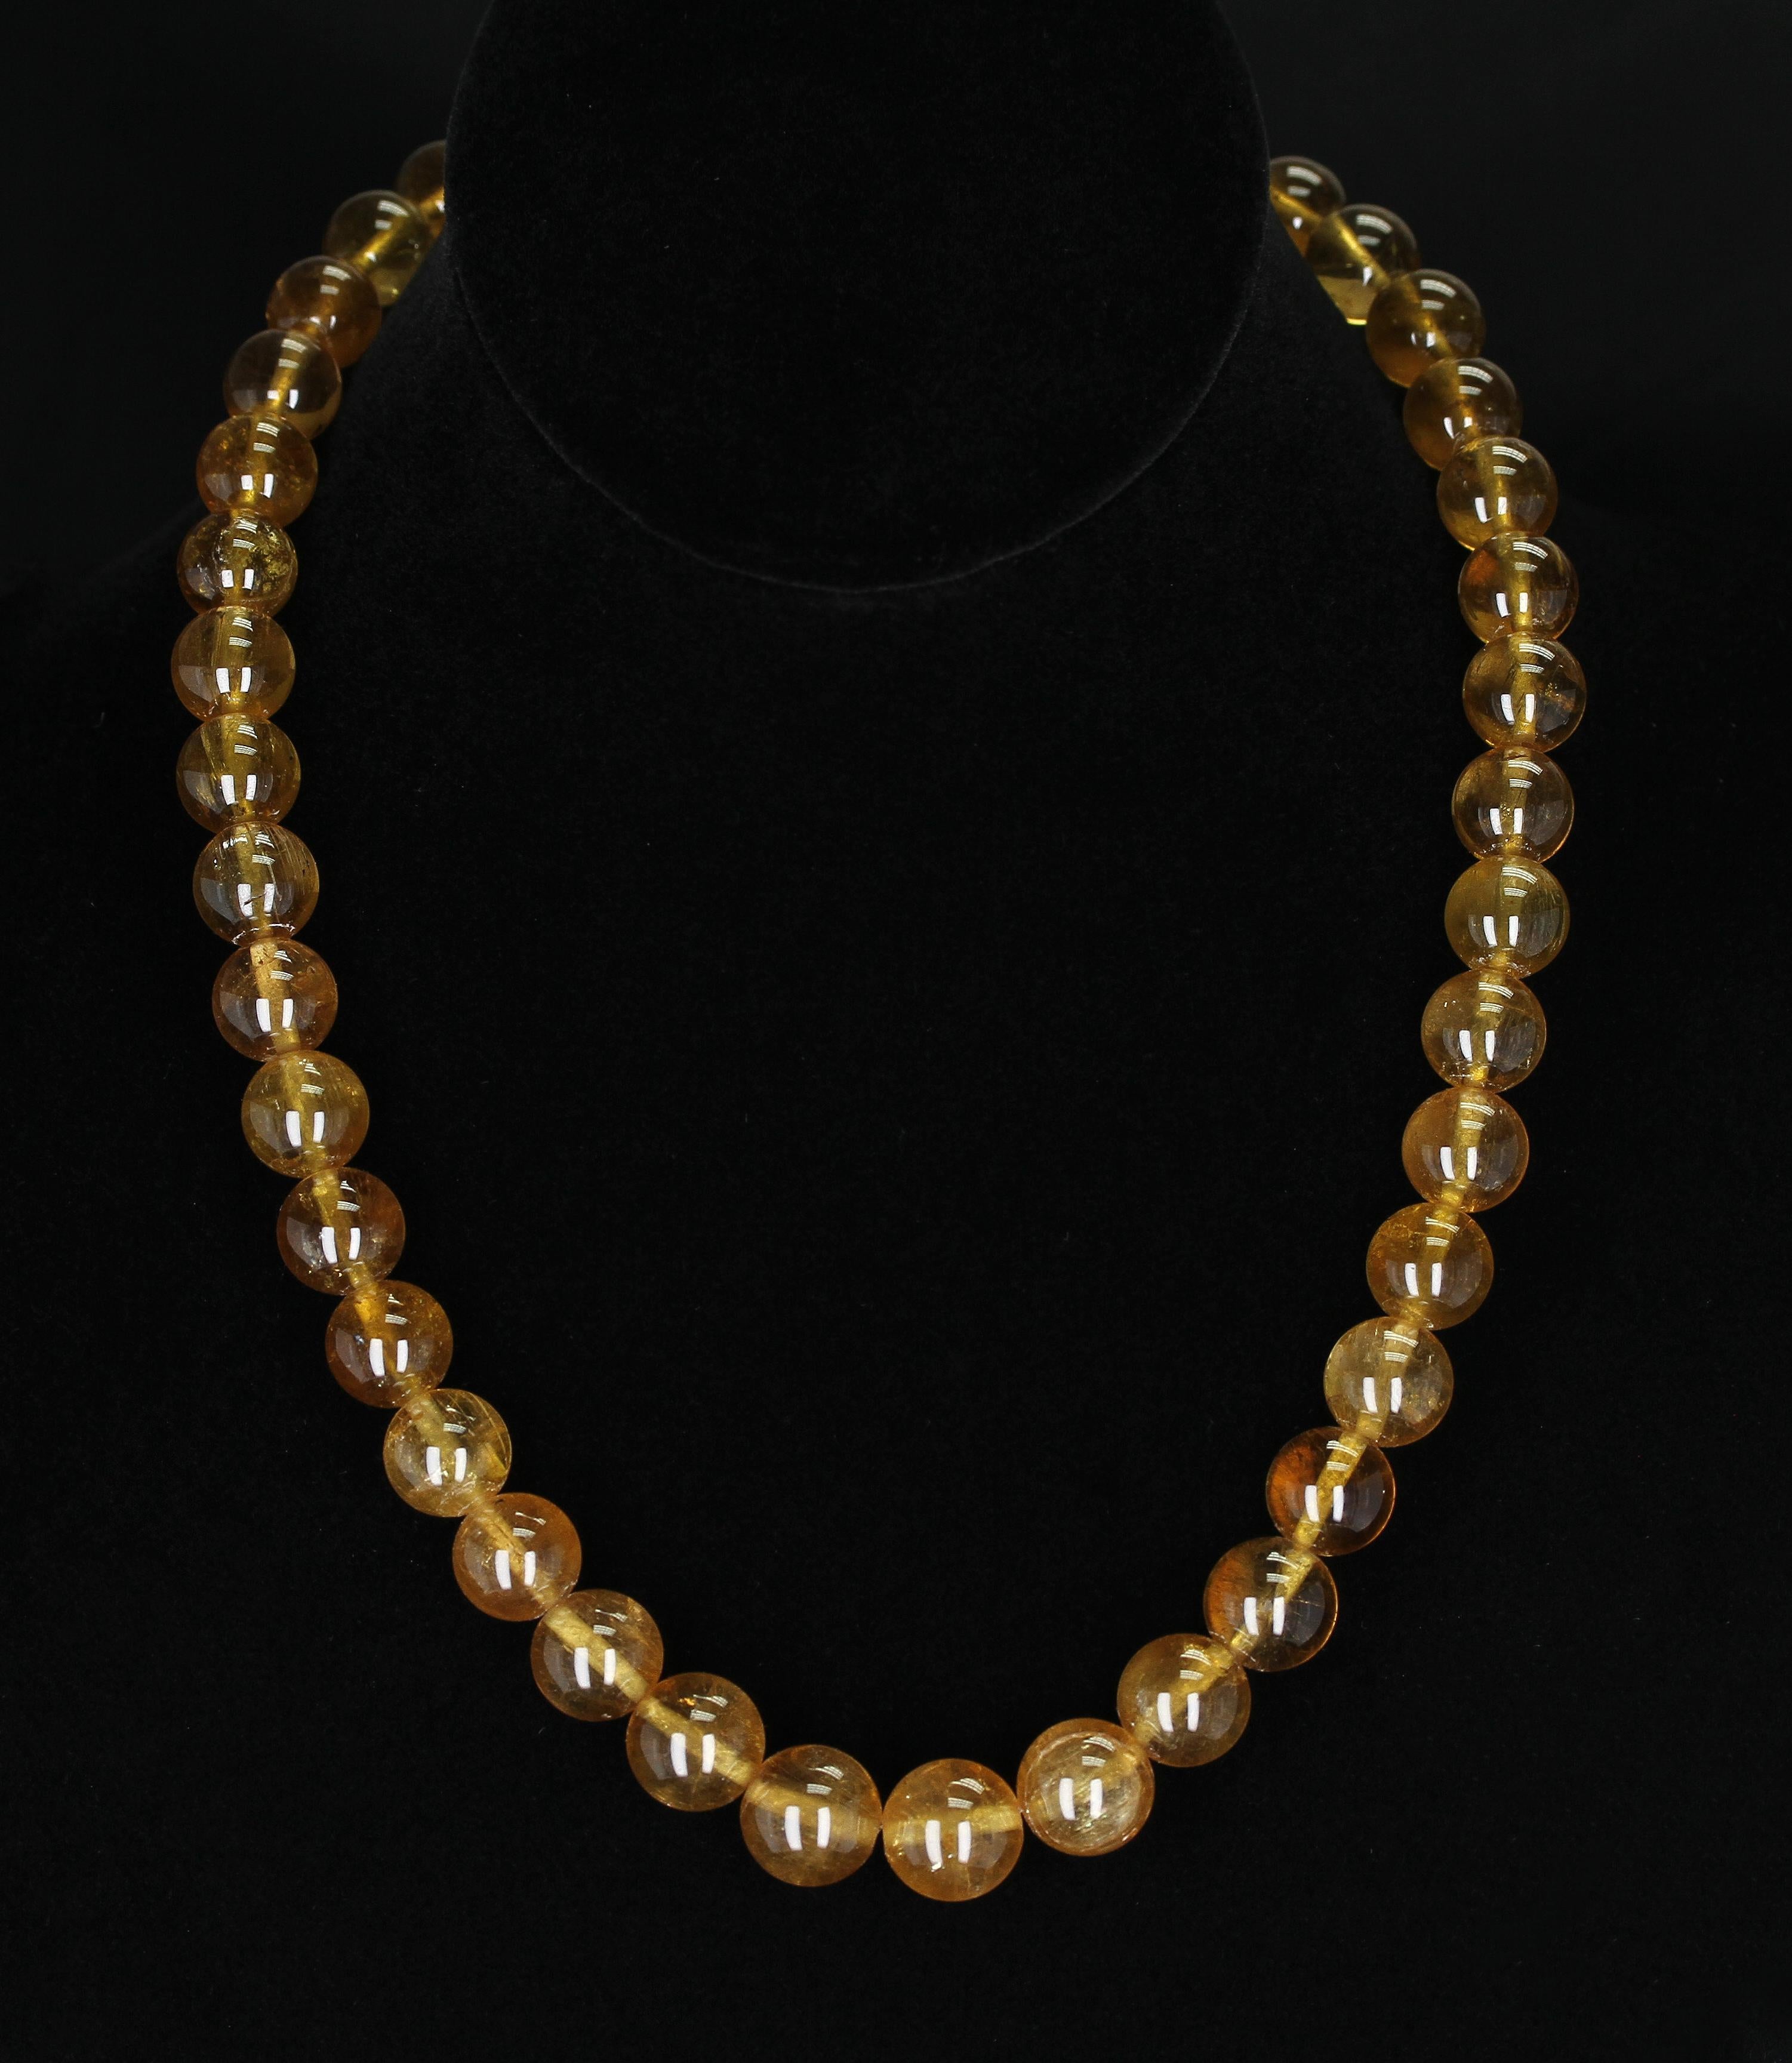 A unique bead necklace with spherical (round) beads of yellow tourmaline with good clarity and perfectly matched; accented with an oxidized gold clasp set with yellow sapphires. The tourmalines measure from 11 mm to 12.75 mm, with the total weight